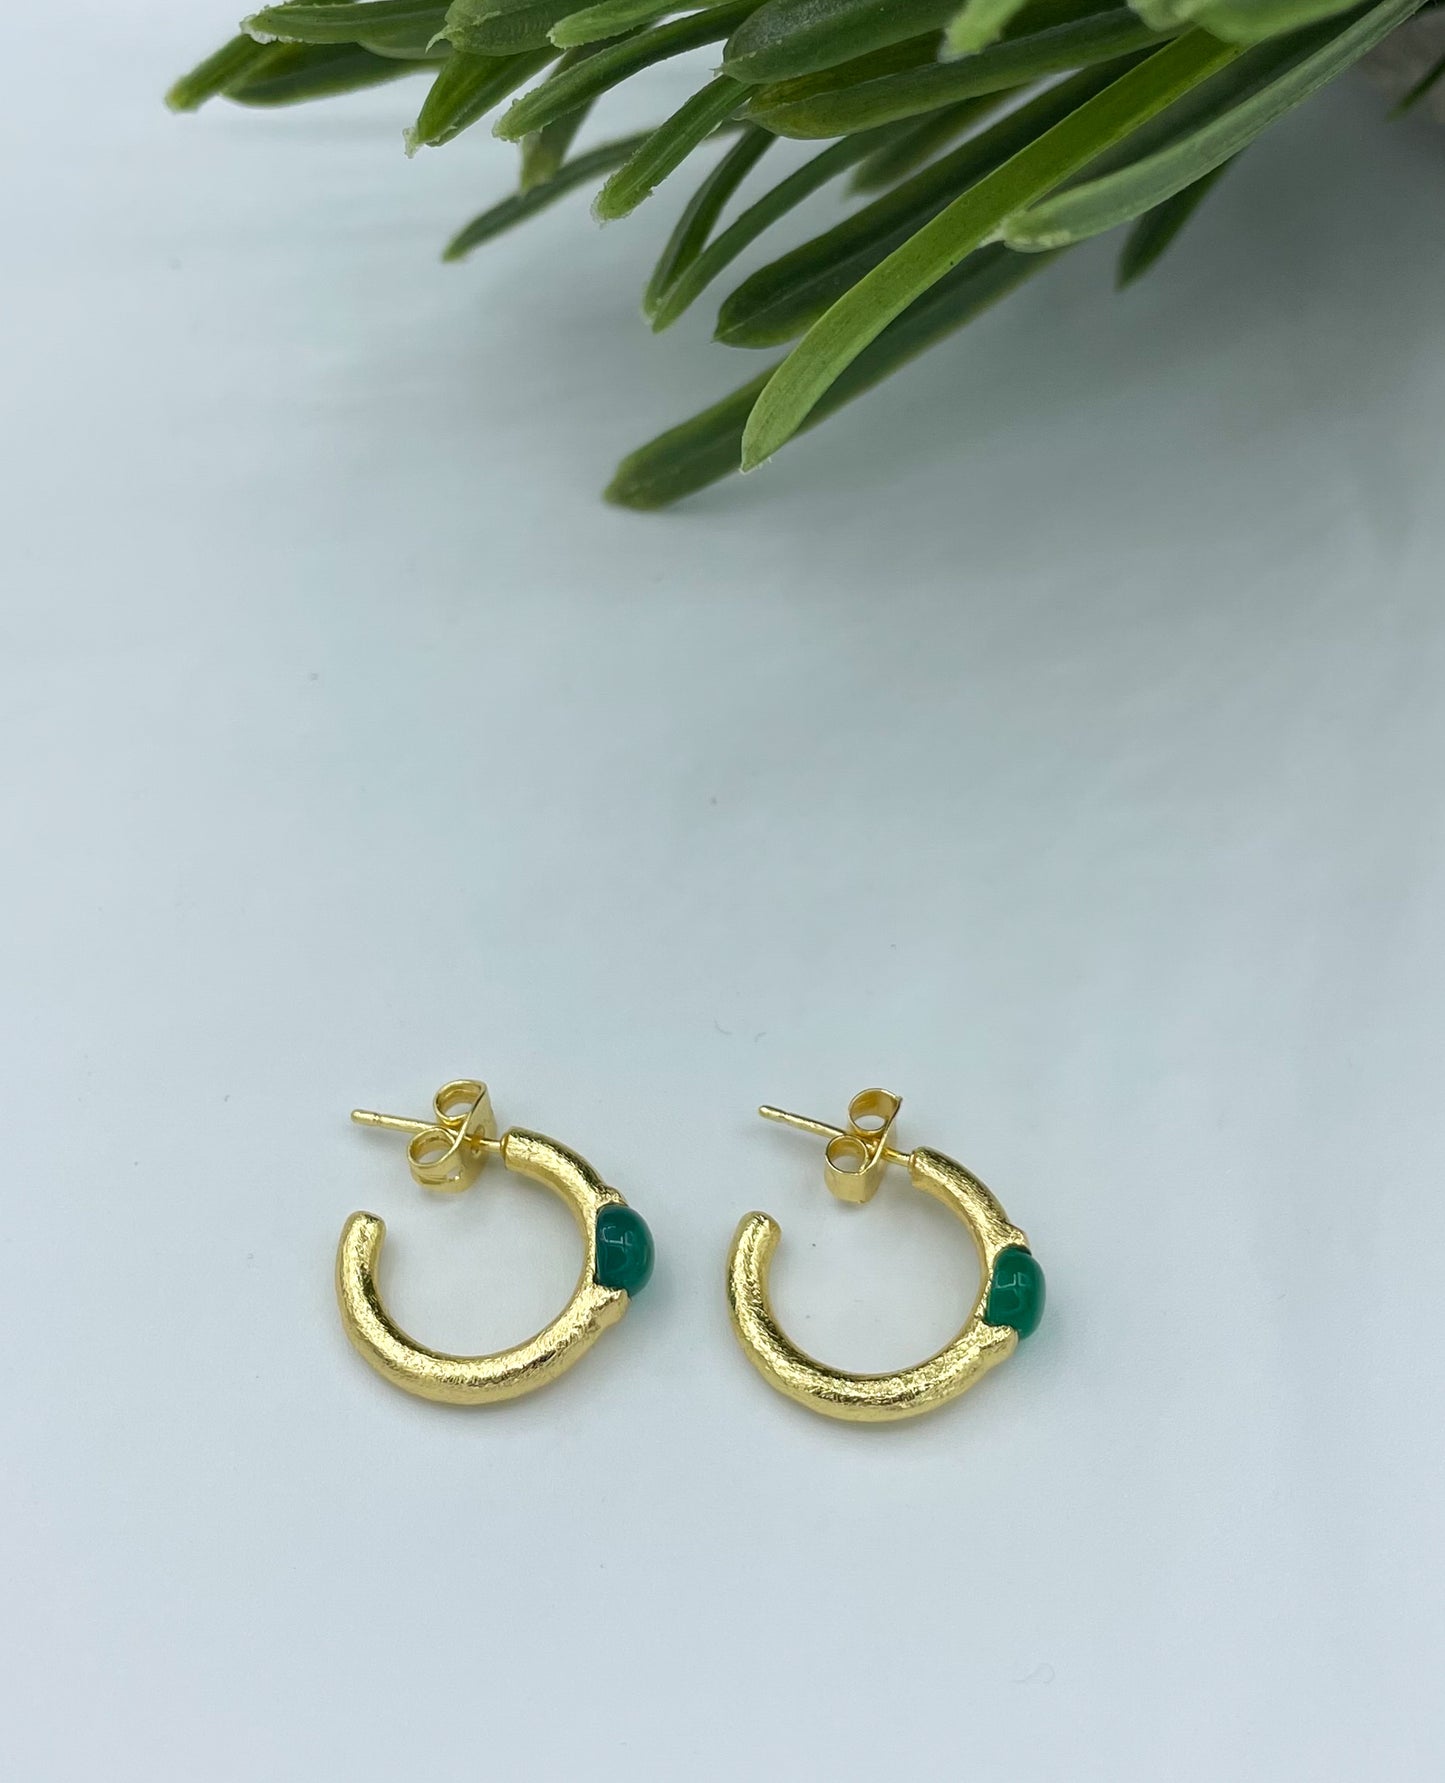 Gold plated textured hoops with green onyx accents